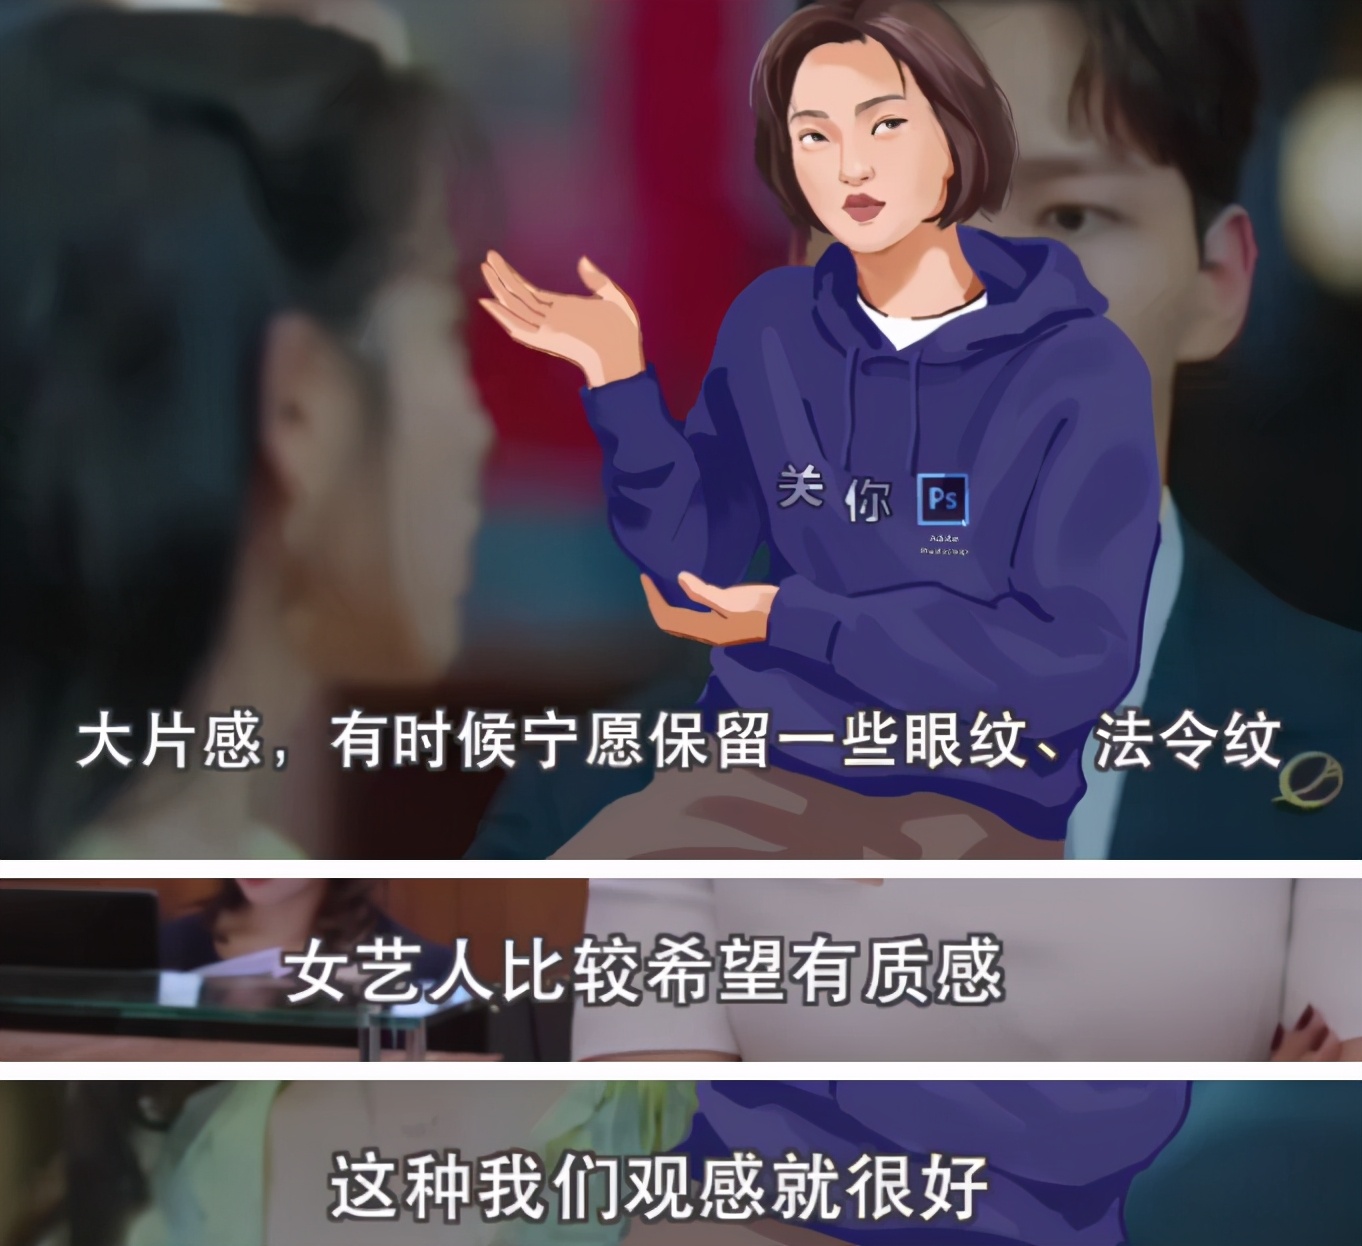 The division that compile a figure explodes makings industry inside, the actor asks to repair pore in turn, call-over Deng Lun is acclaimed intentionally